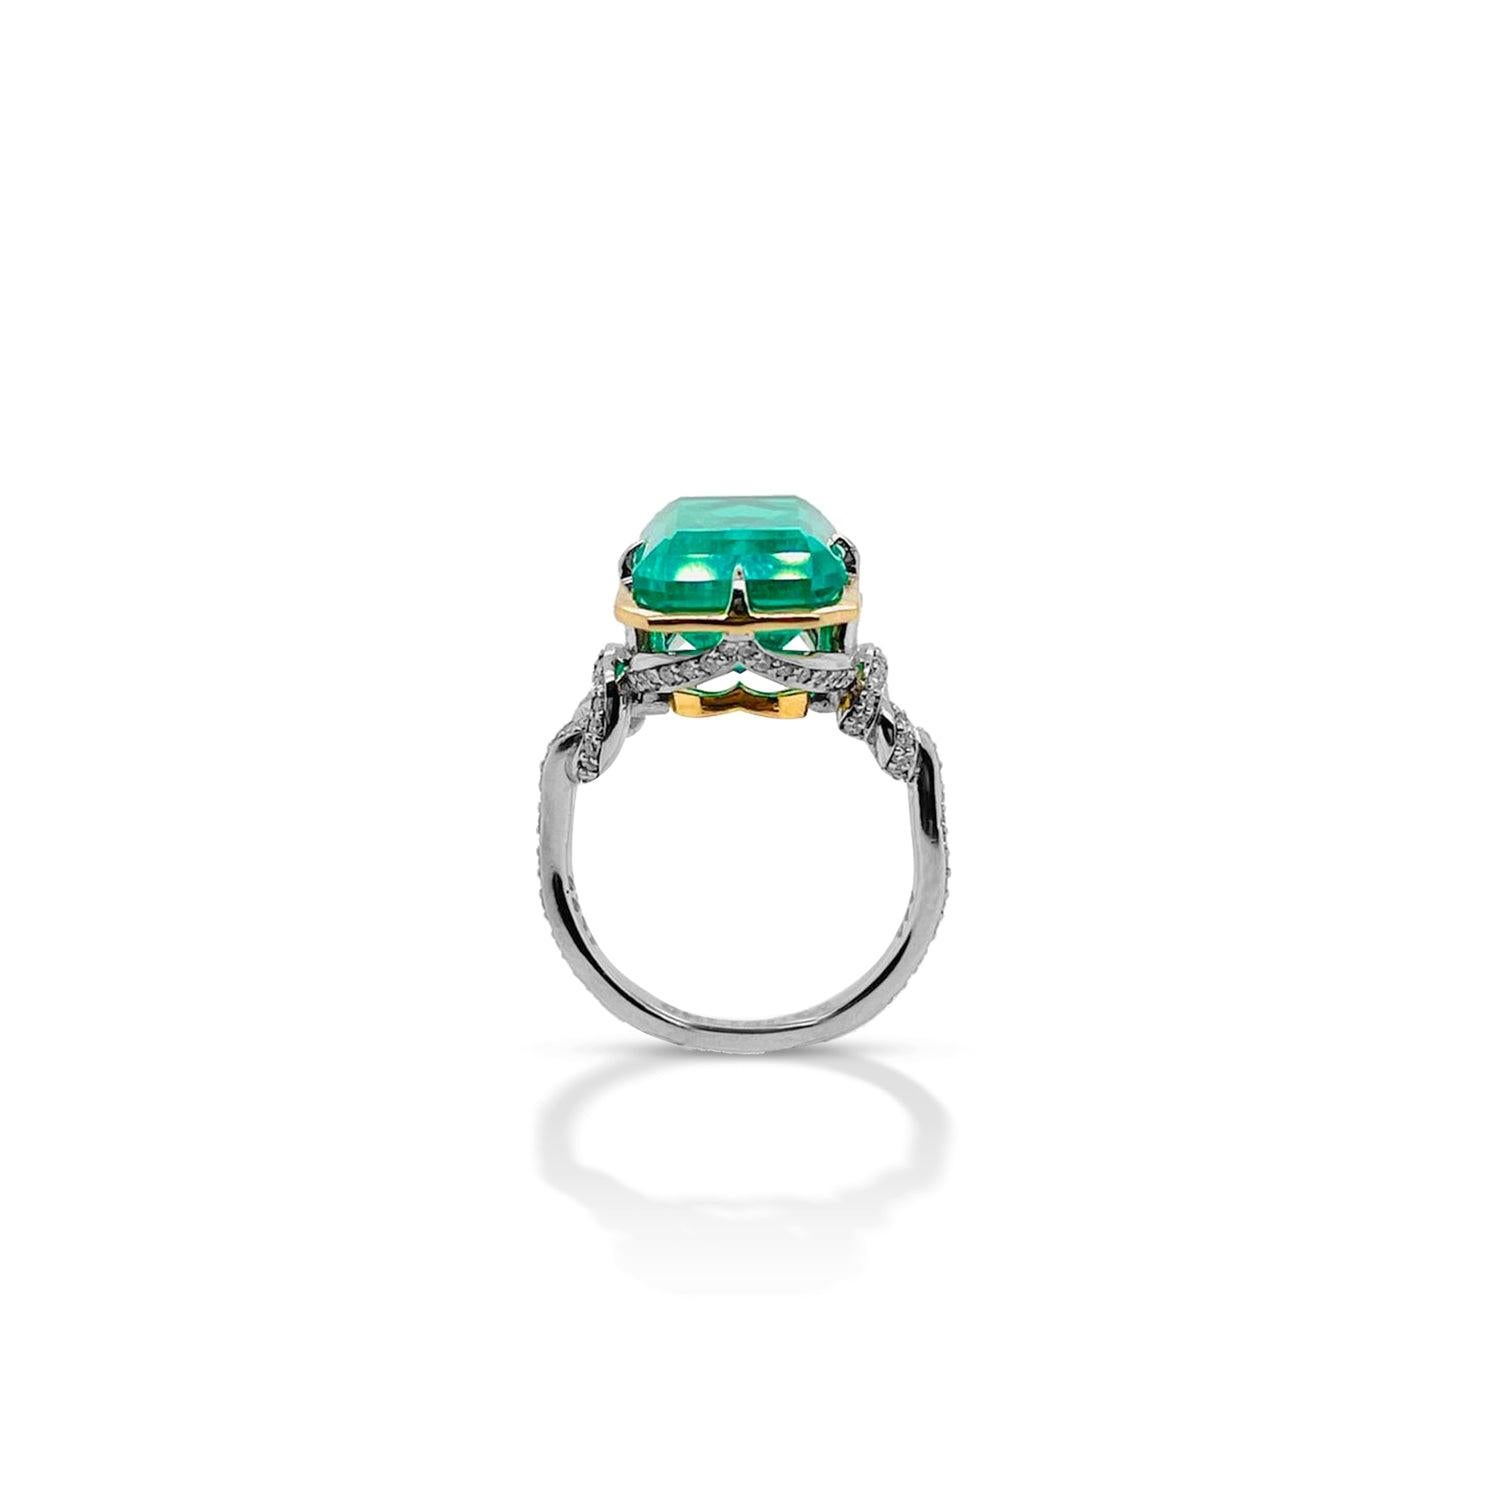 Artist 5.79ct Zambian Emerald in Forget Me Knot Style Ring